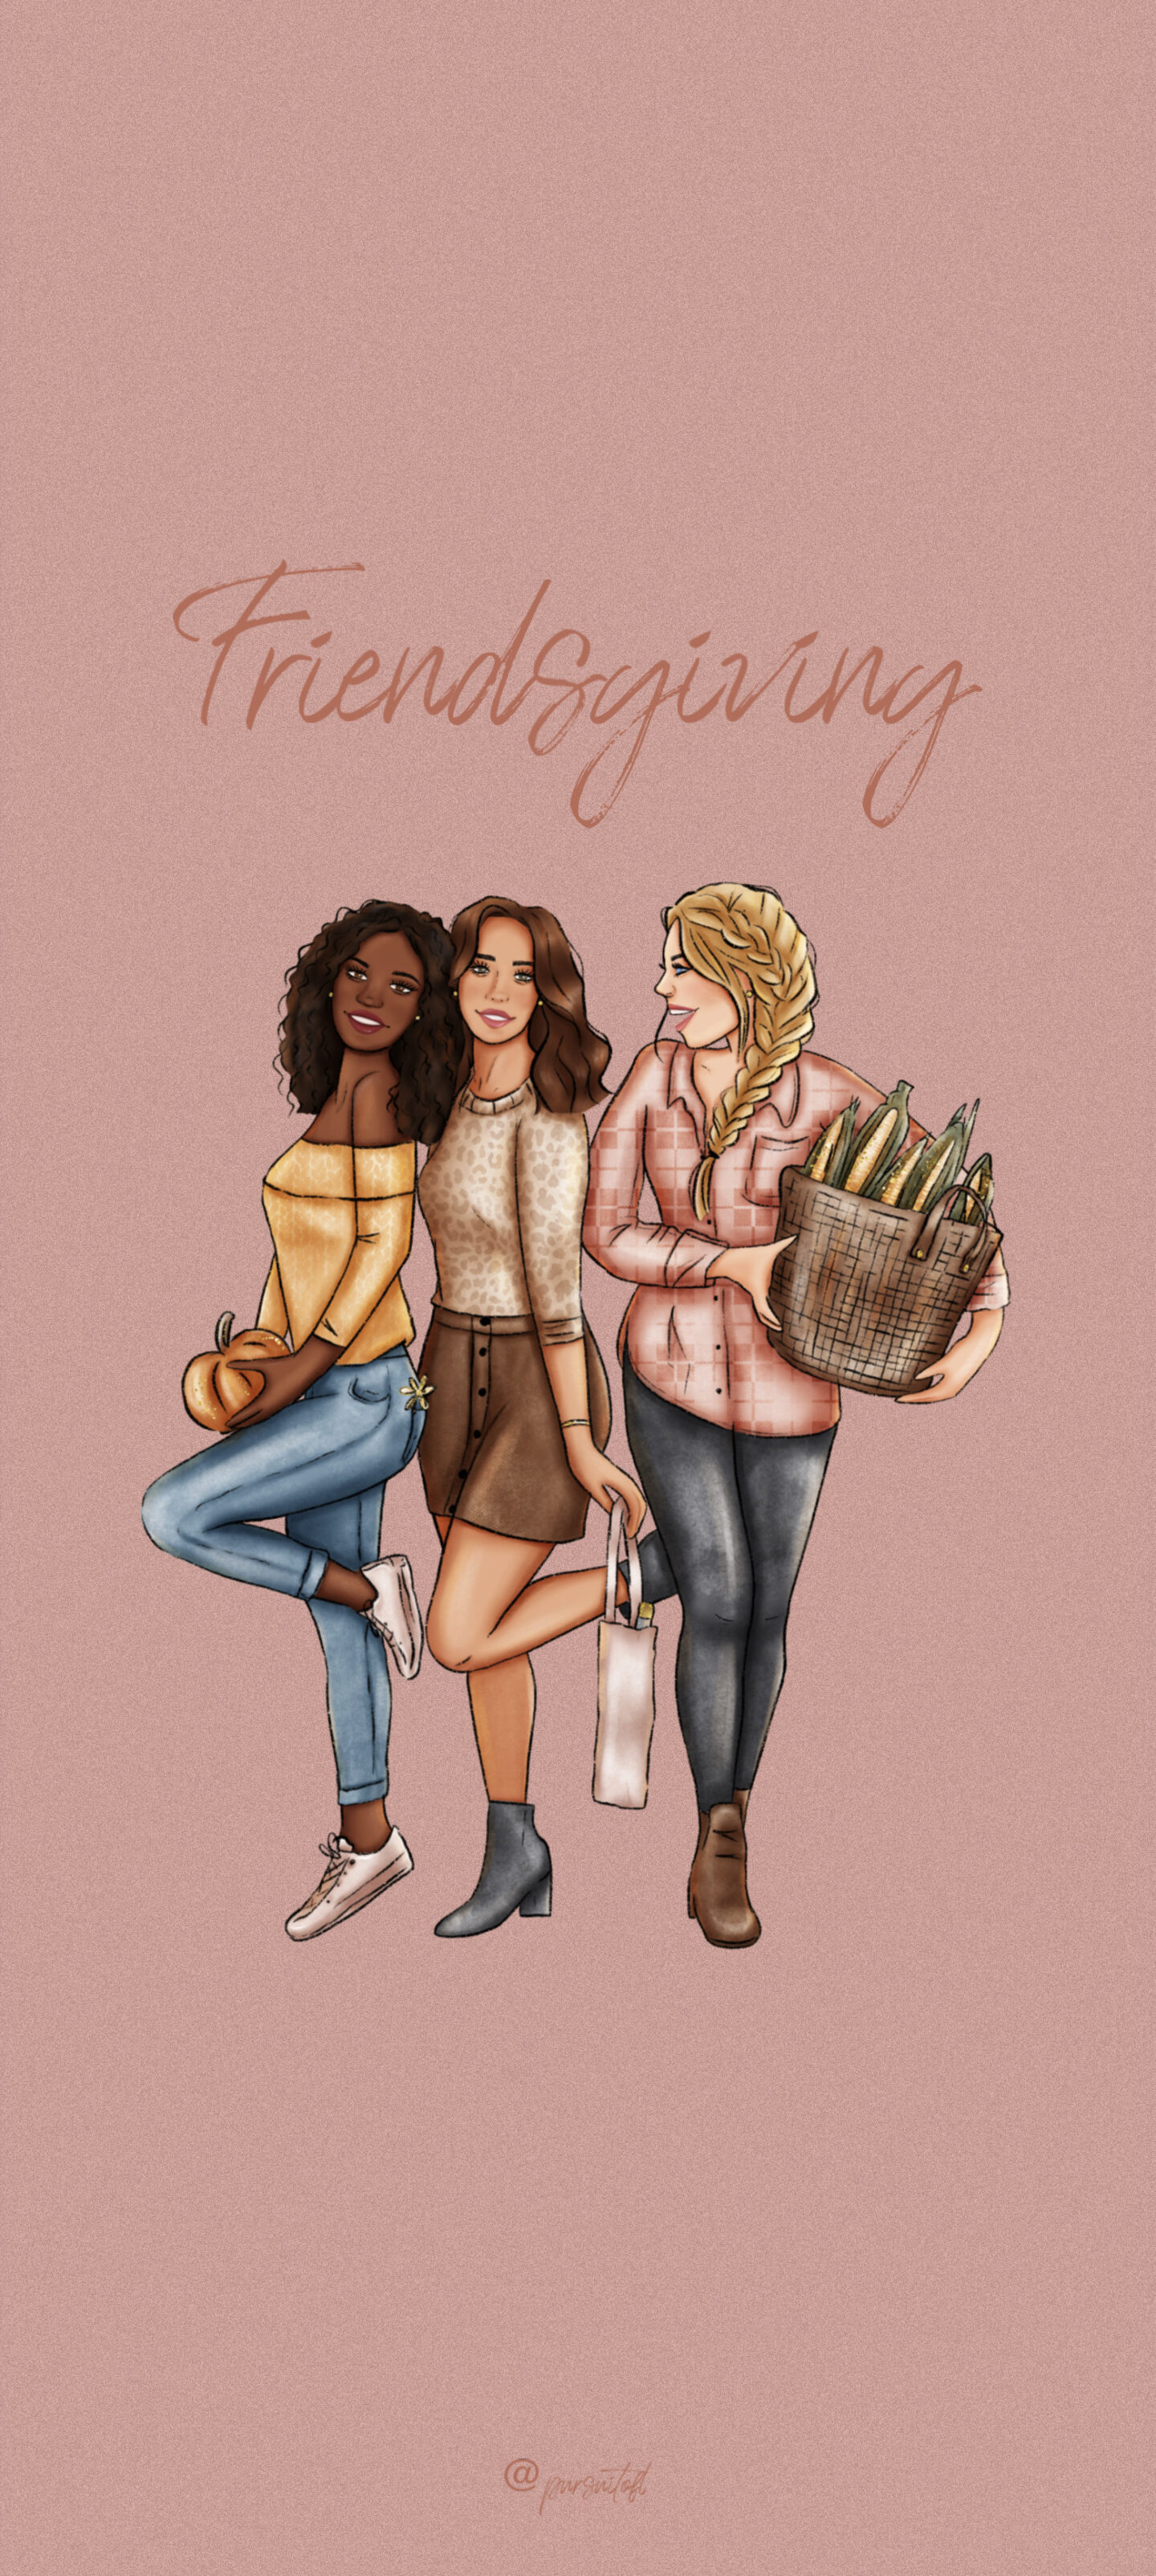 Brown Phone Wallpaper with 3 Friends Wearing Fall Outfits, Holding Corn, a Pumpkin, and Wine, with Friendsgiving Text